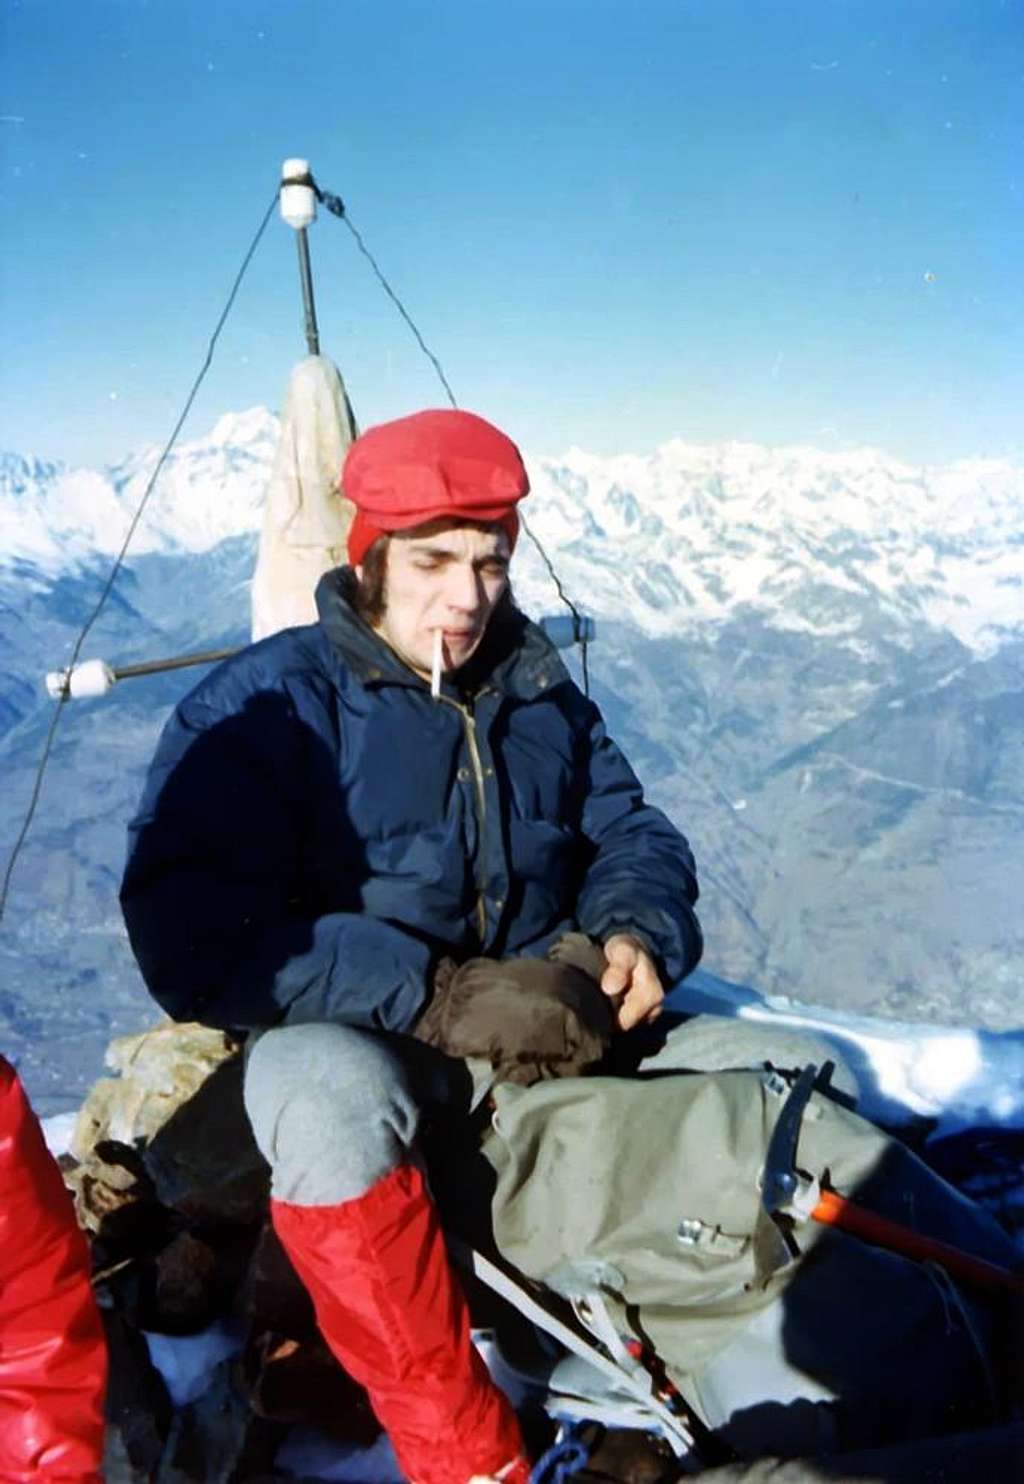 Mike Burke on the EVEREST's SUMMIT? NO: Camill Roby FERRONATO in day from Gimillan EMILIUS's SUMM WINTER '75